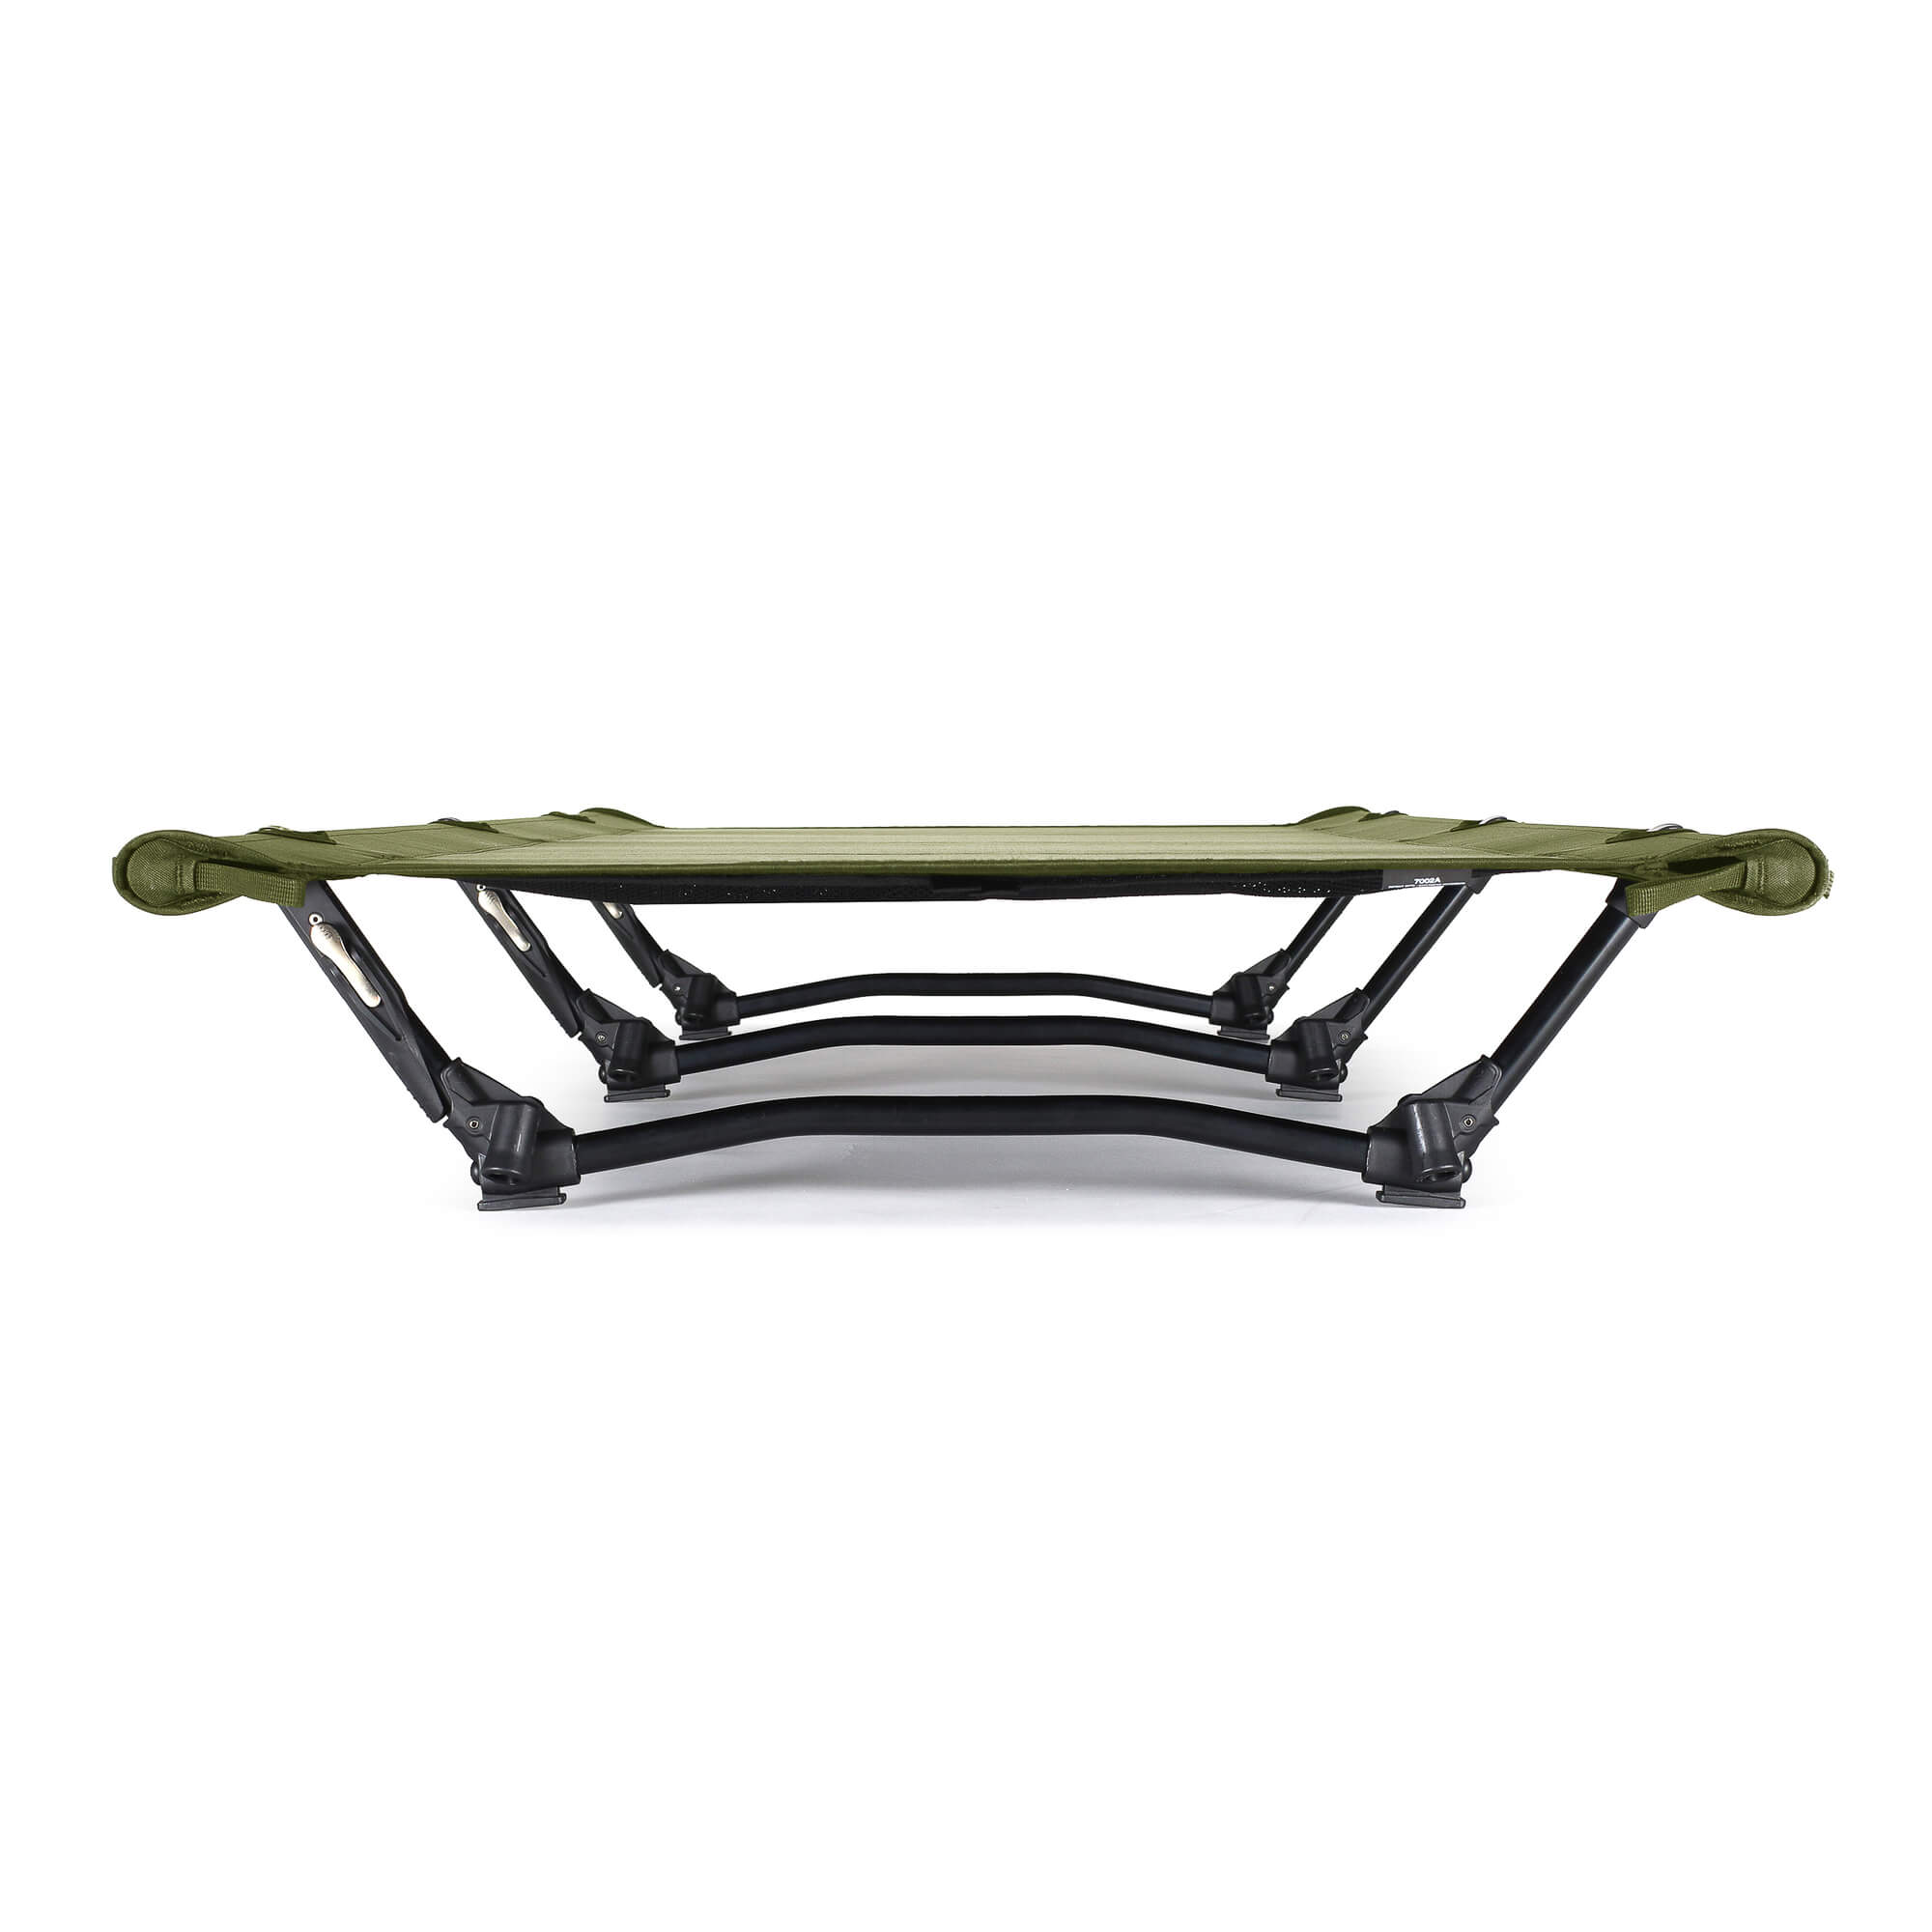 Tactical Cot One Convertible